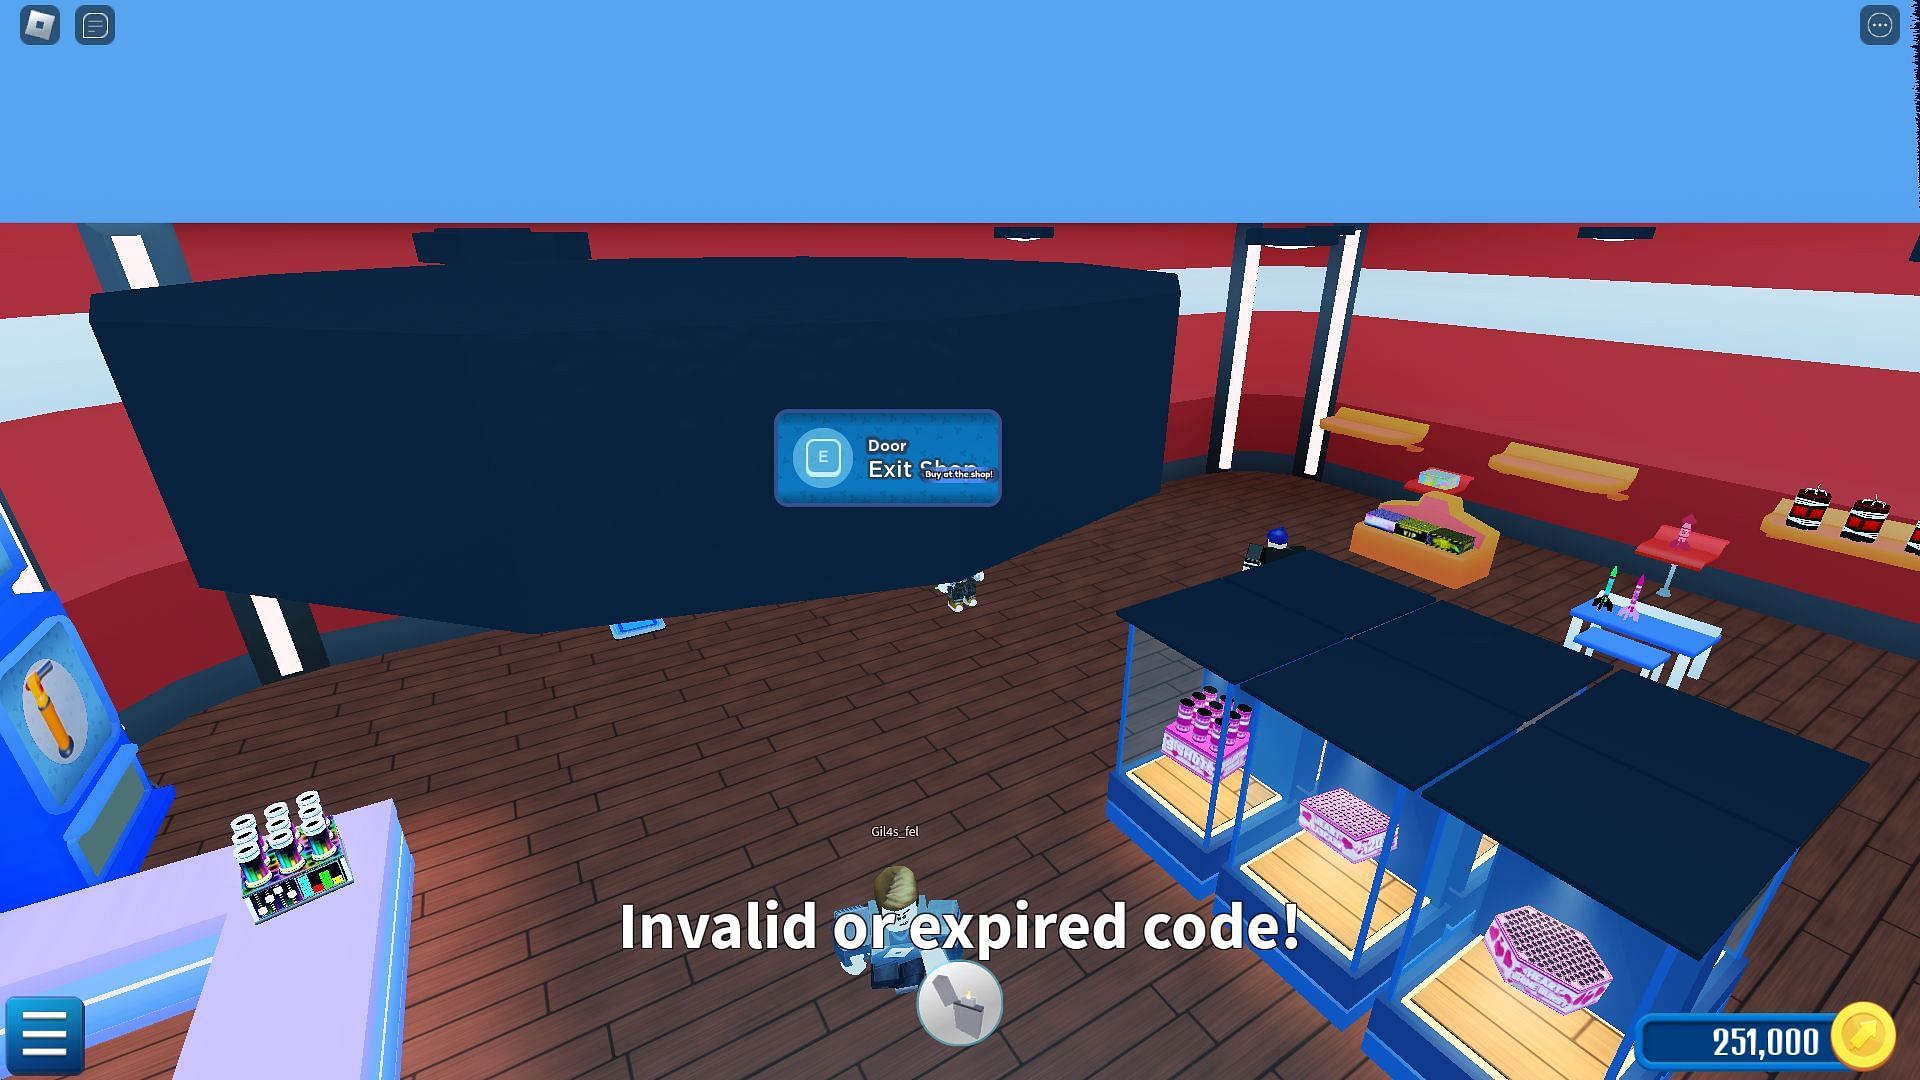 Troubleshooting codes for Fireworks Playground (Image via Roblox)